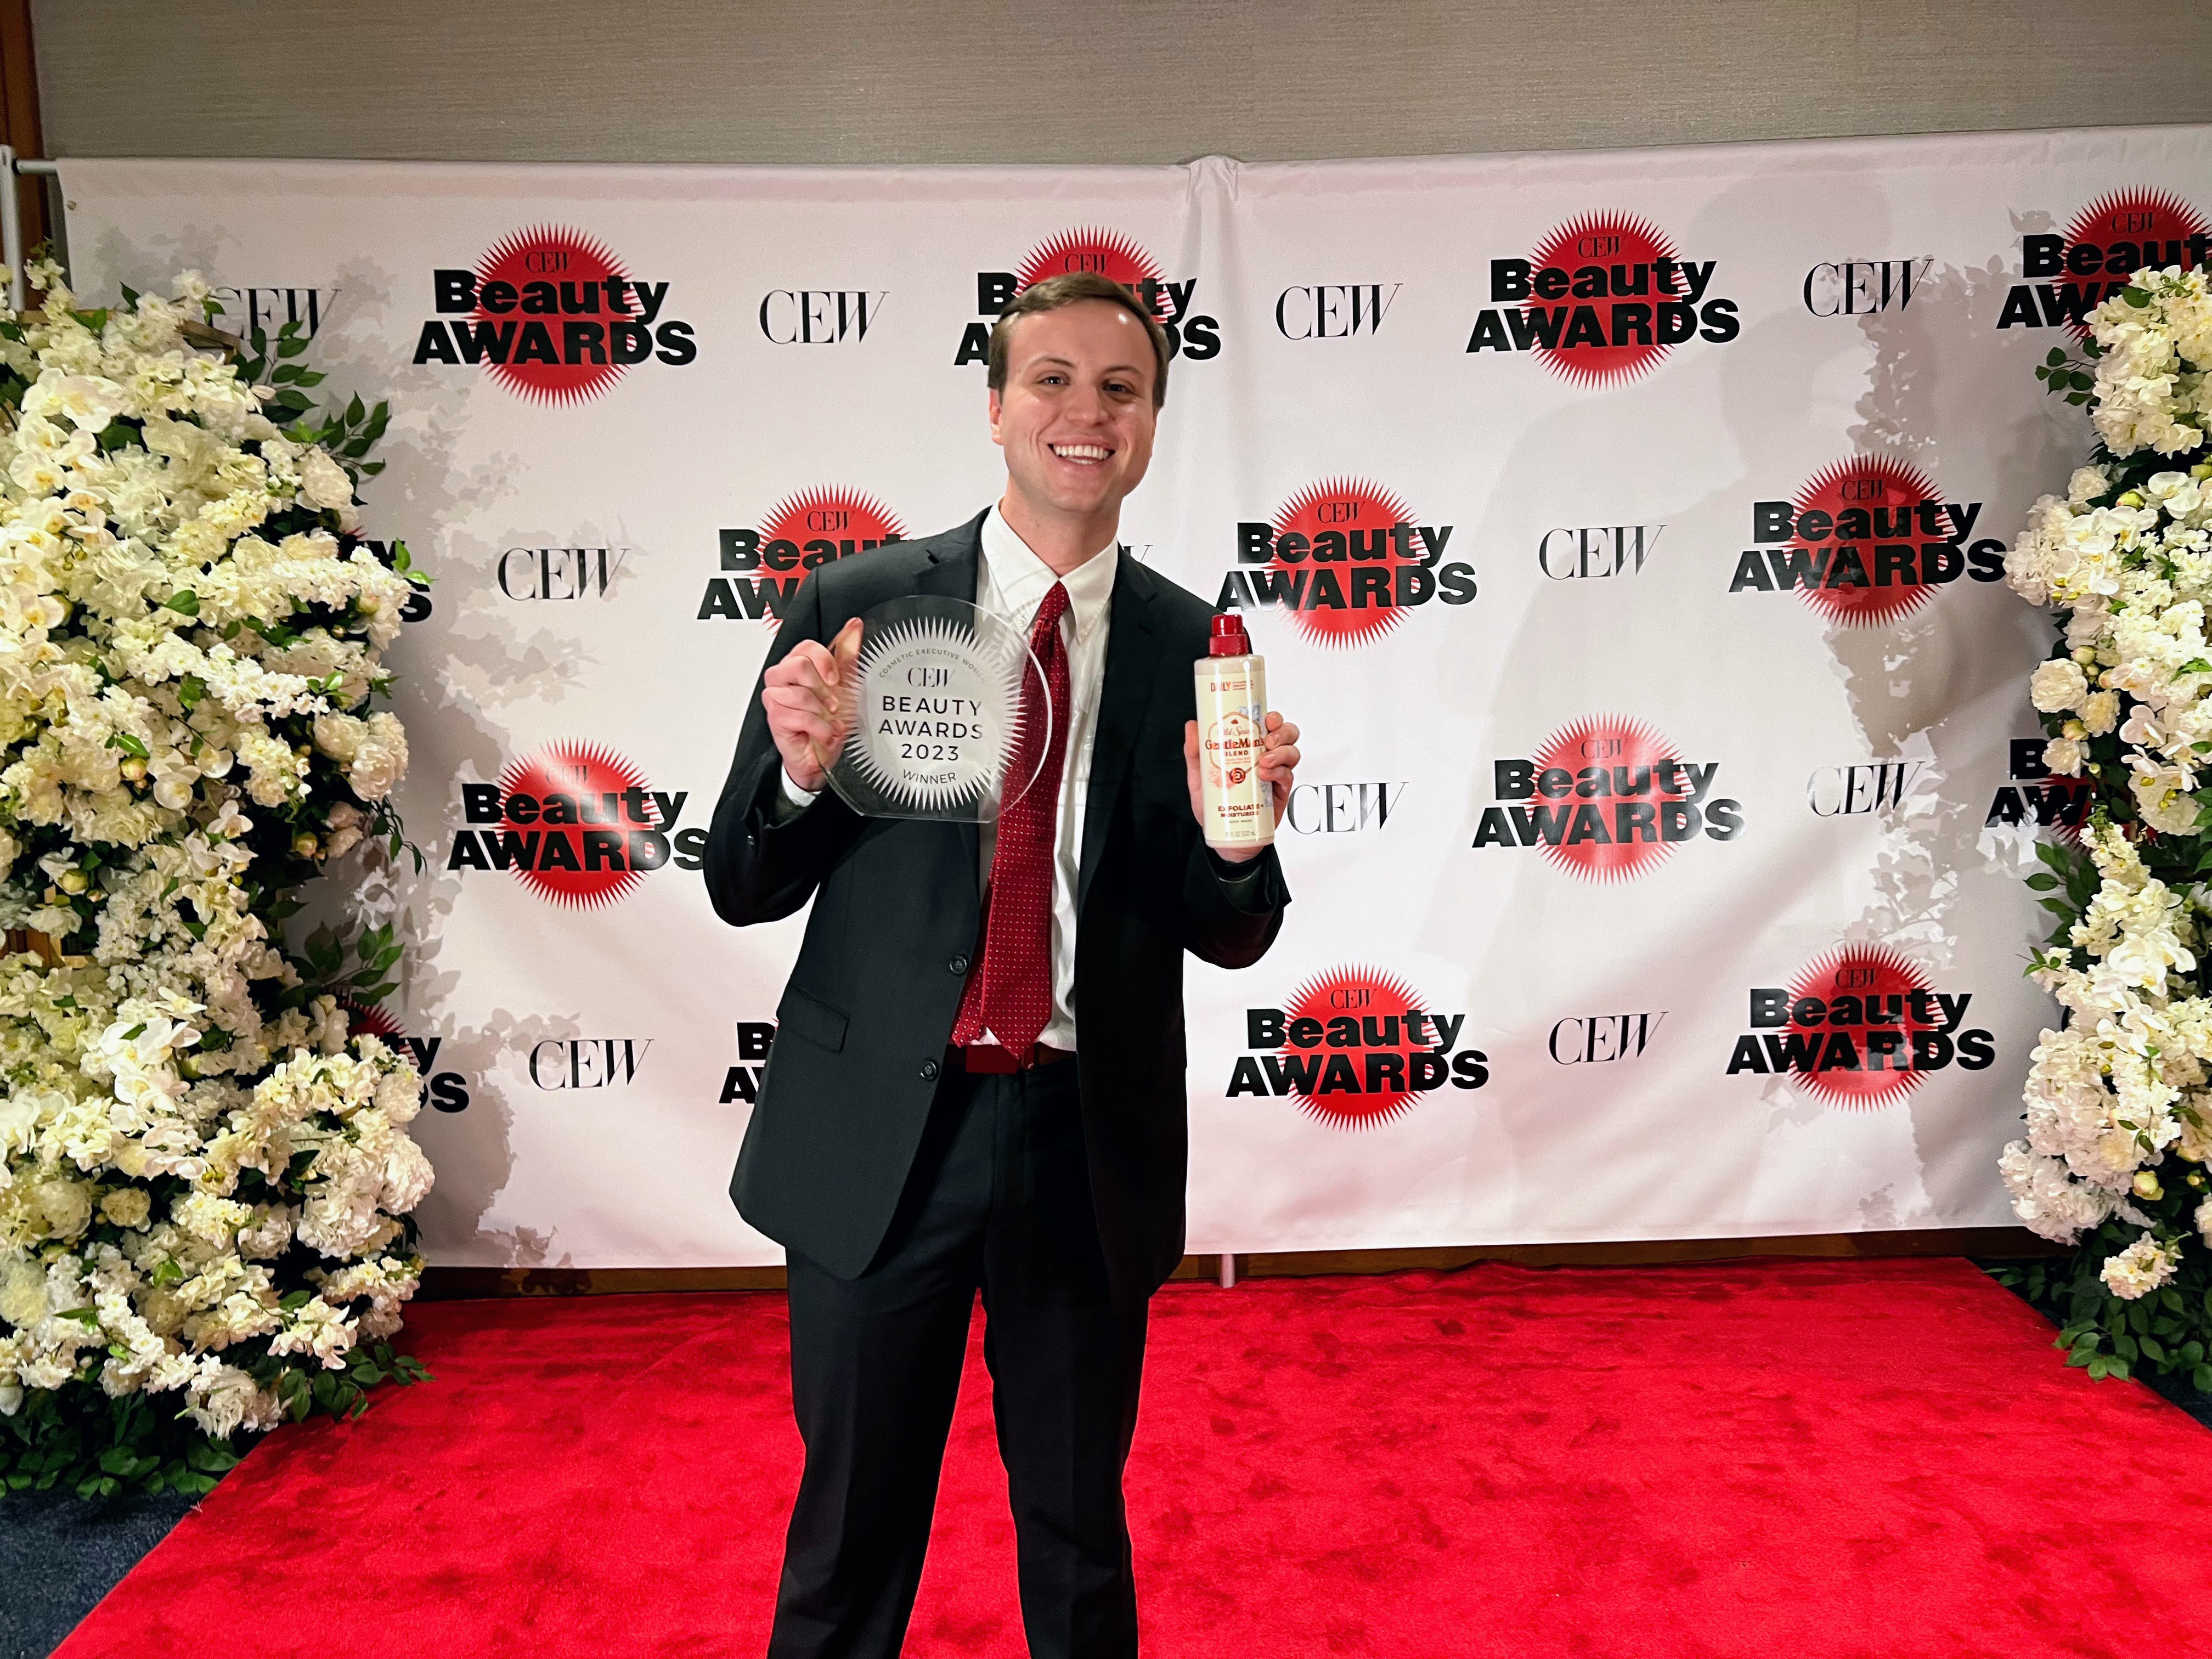 Matthew Bonner holding Old Spice body wash and award